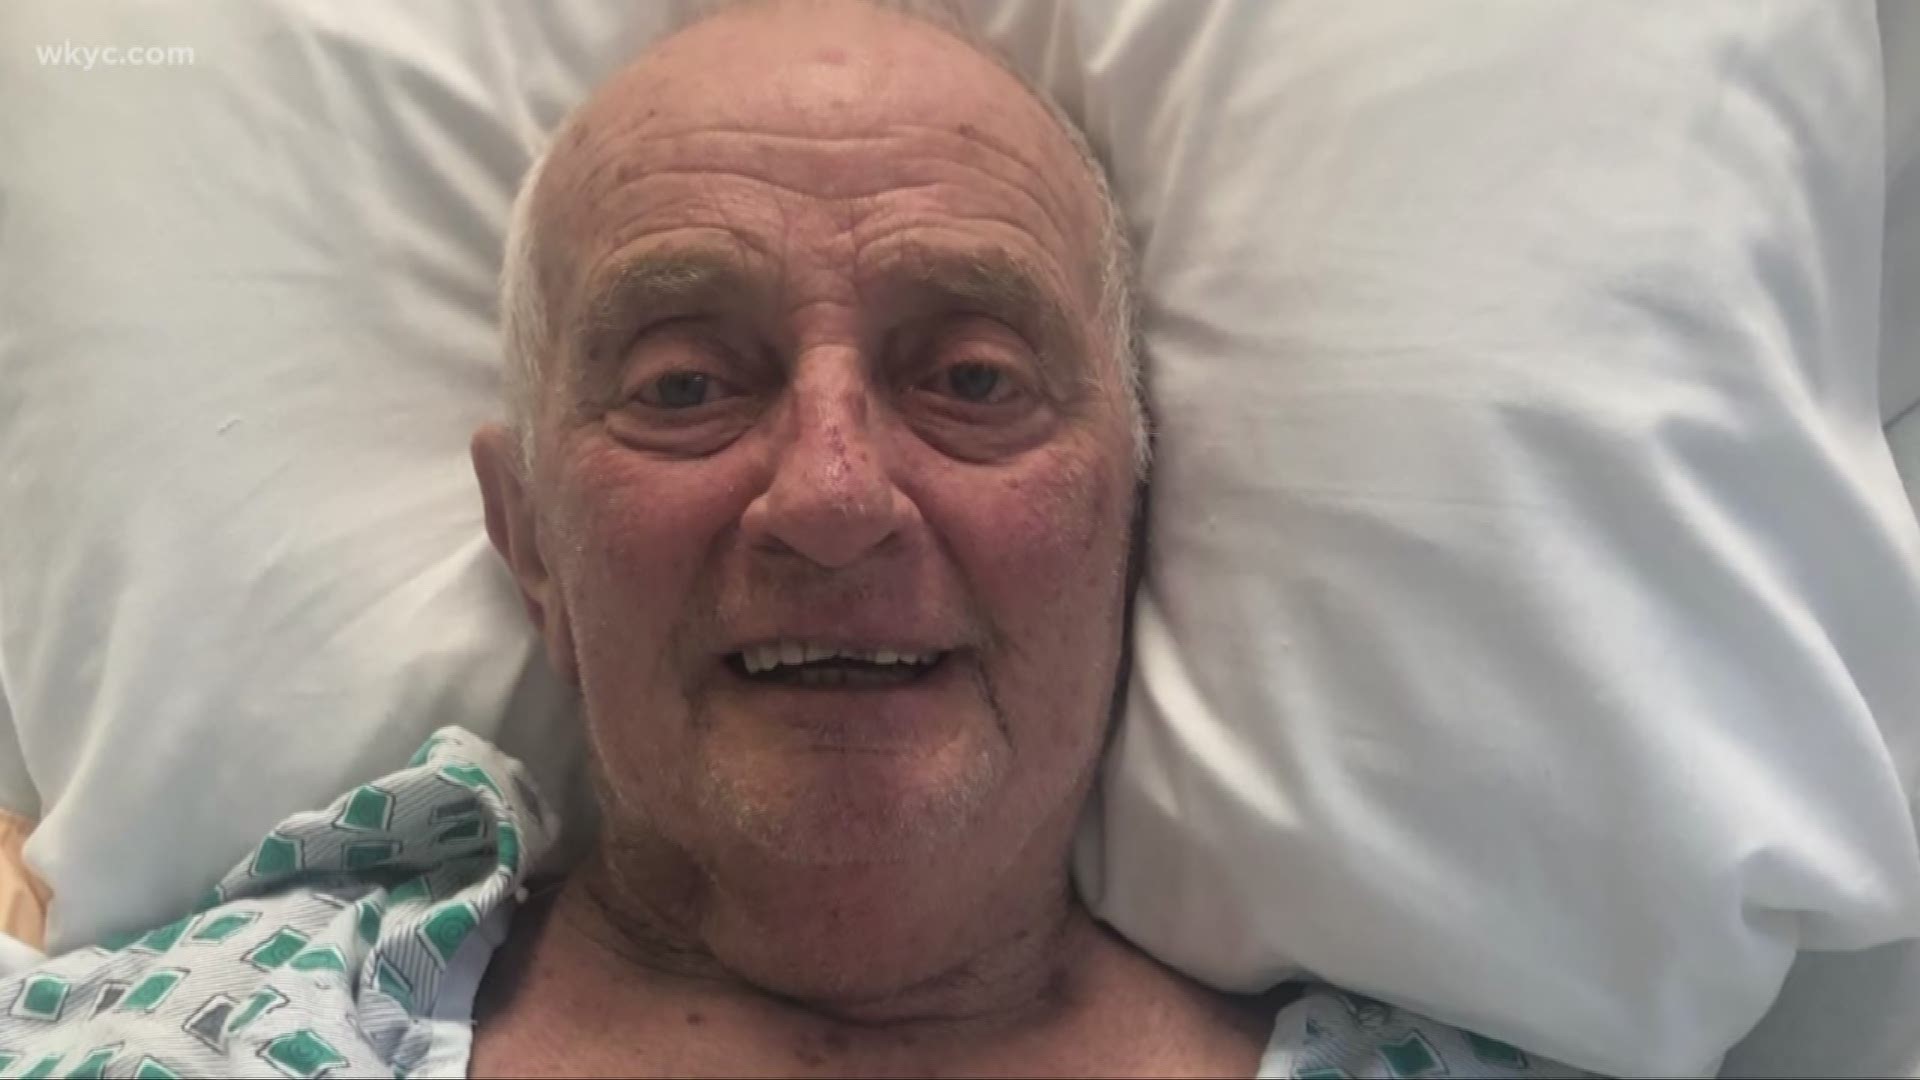 Mahoning County man returns home after falling ill in Europe